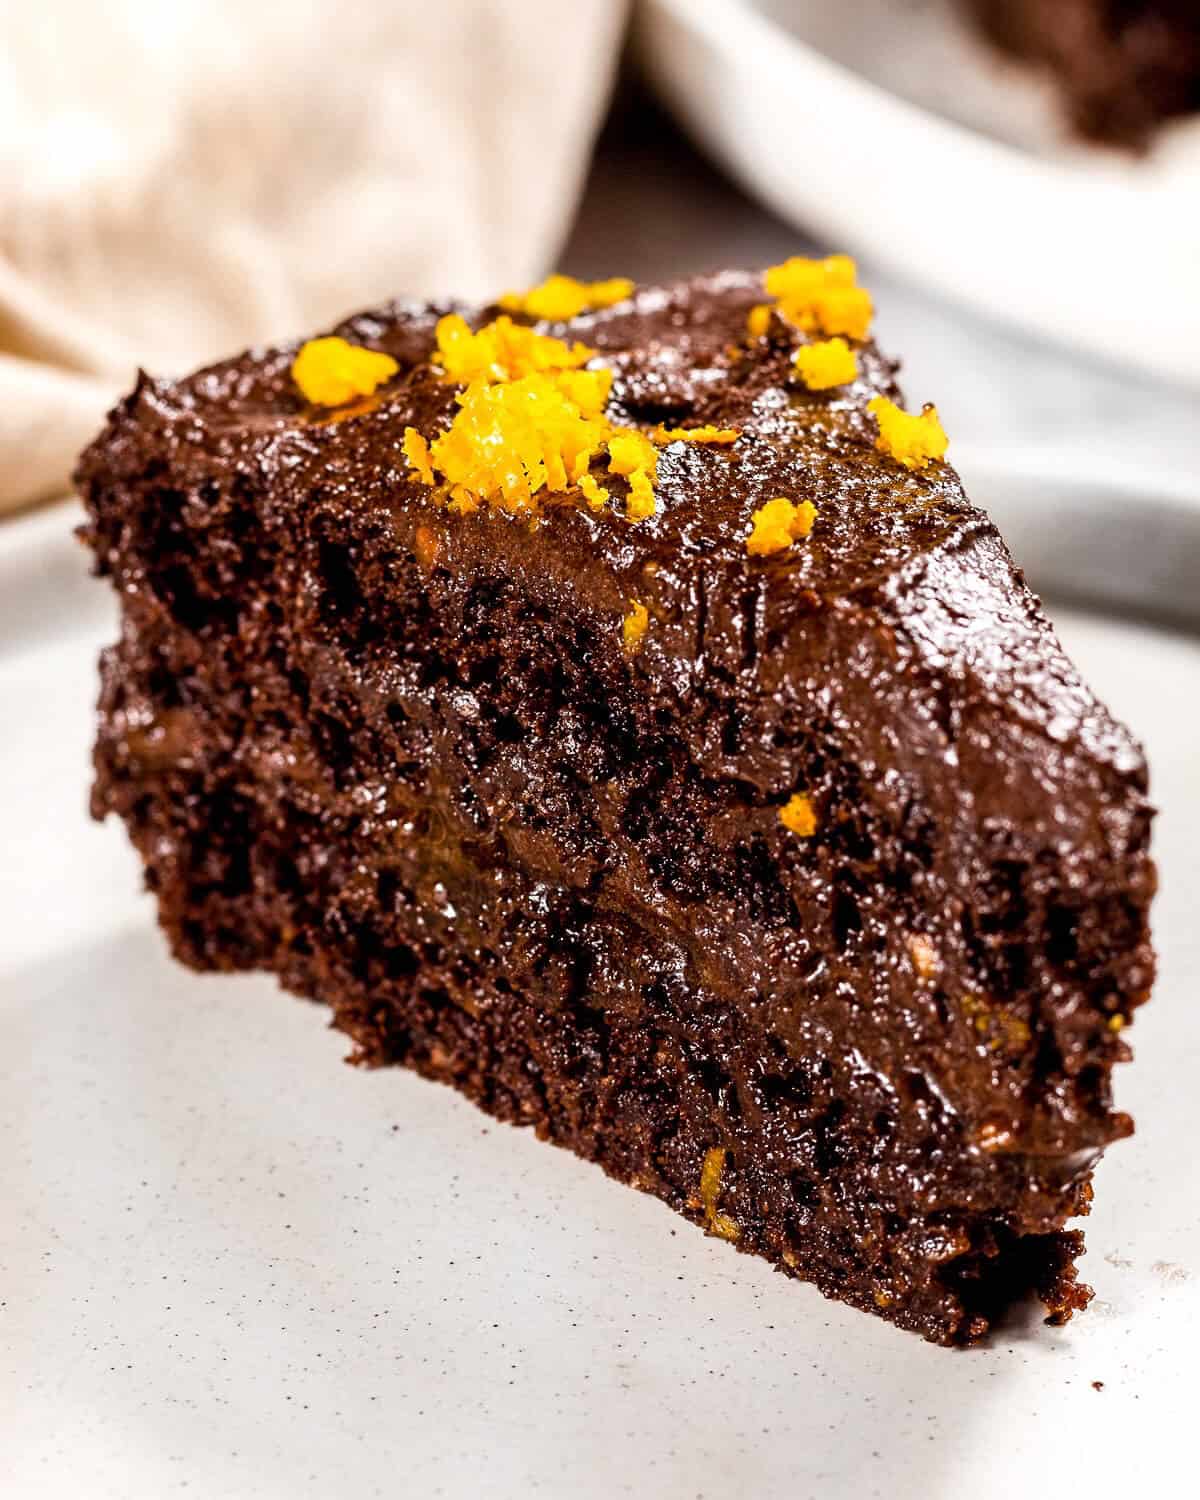 A close up image of chocolate orange cake with healthy chocolate frosting.